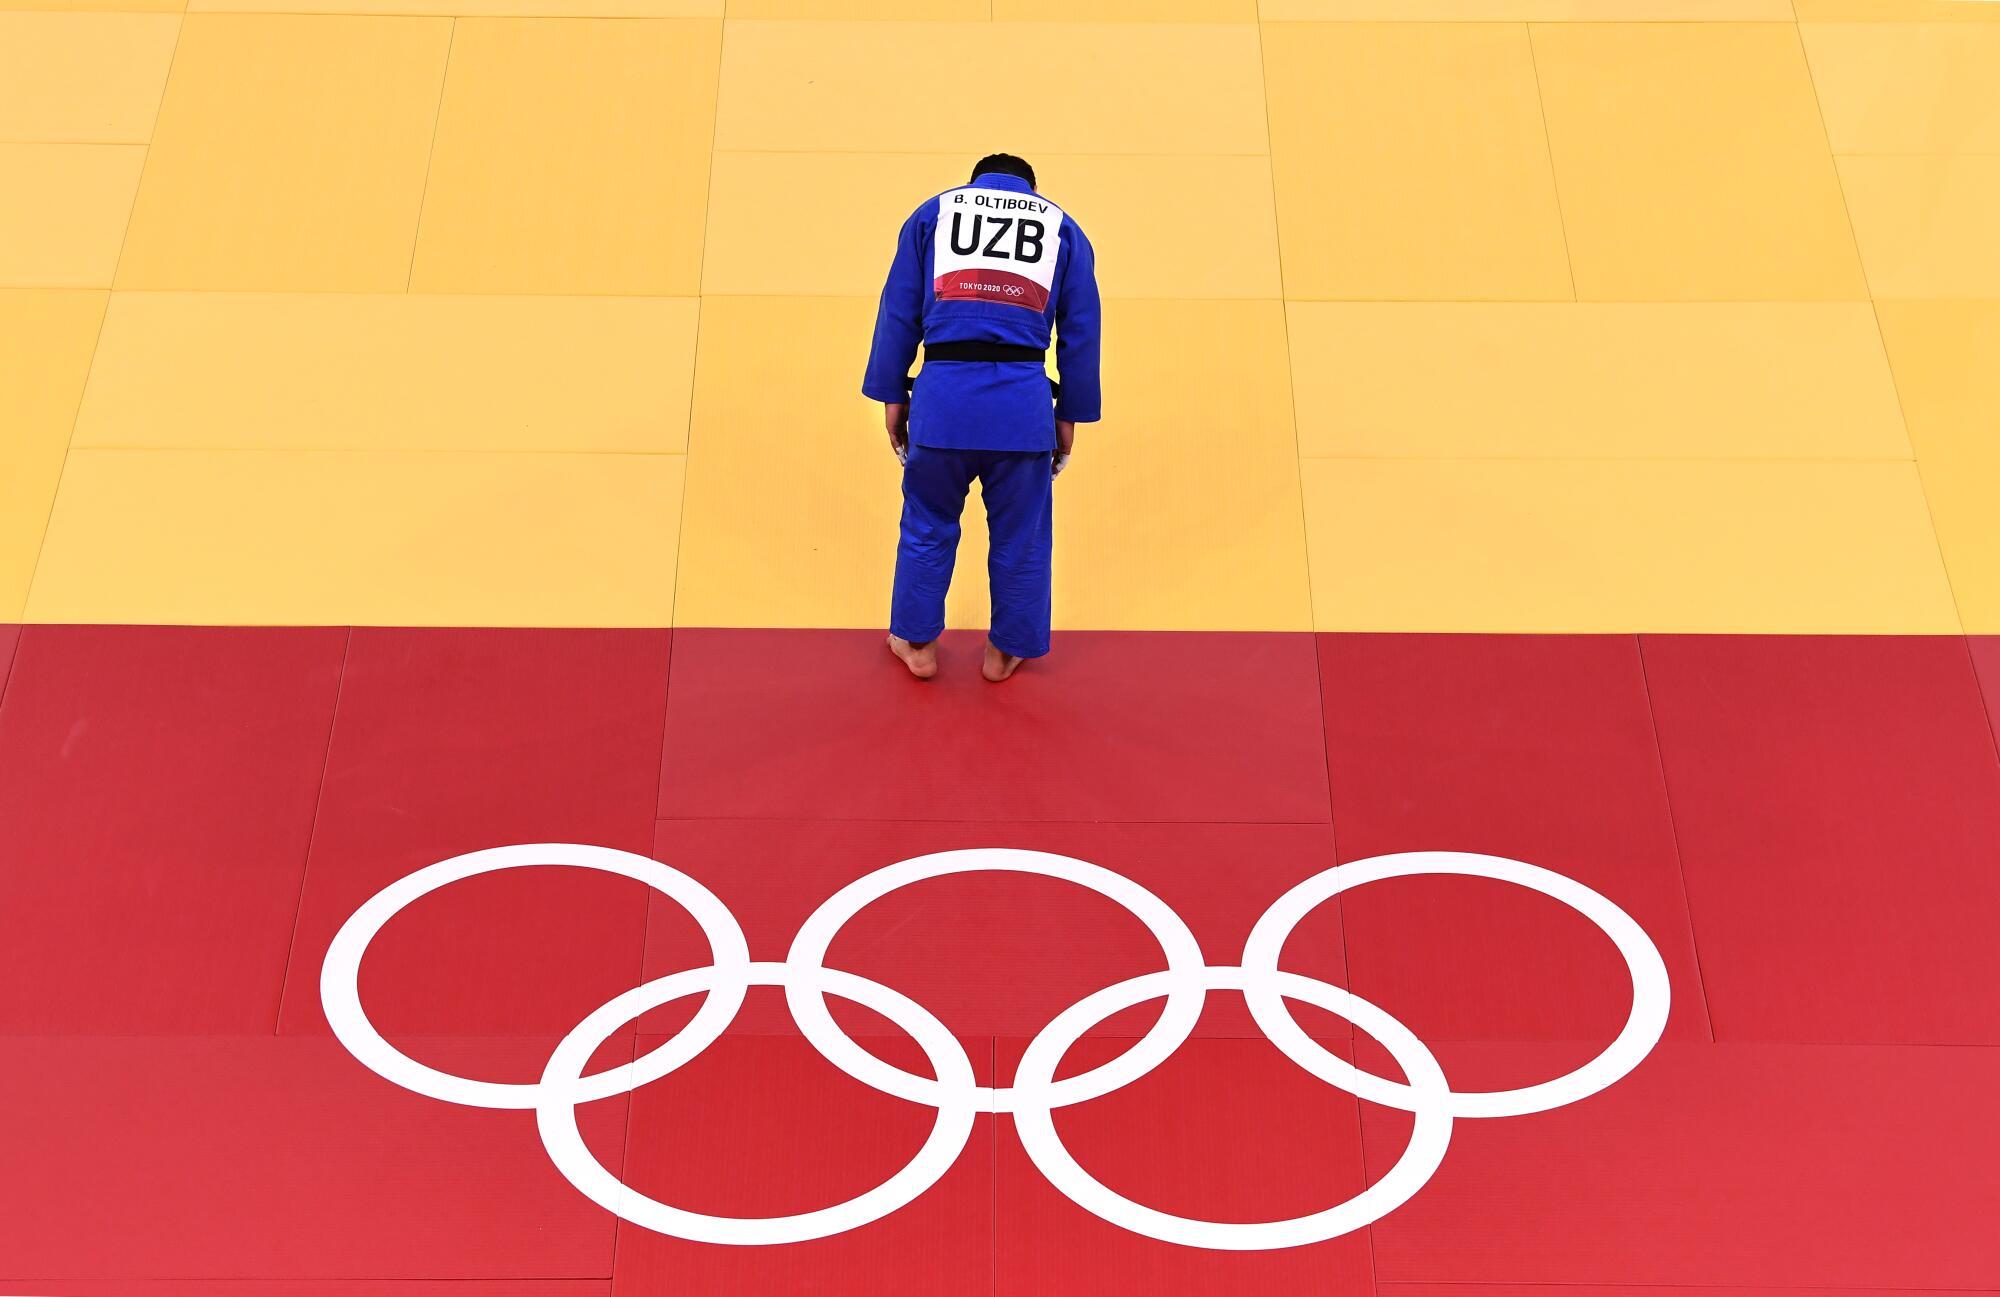 Bekmurod Oltiboev bows after a judo match at the Tokyo Olympics.